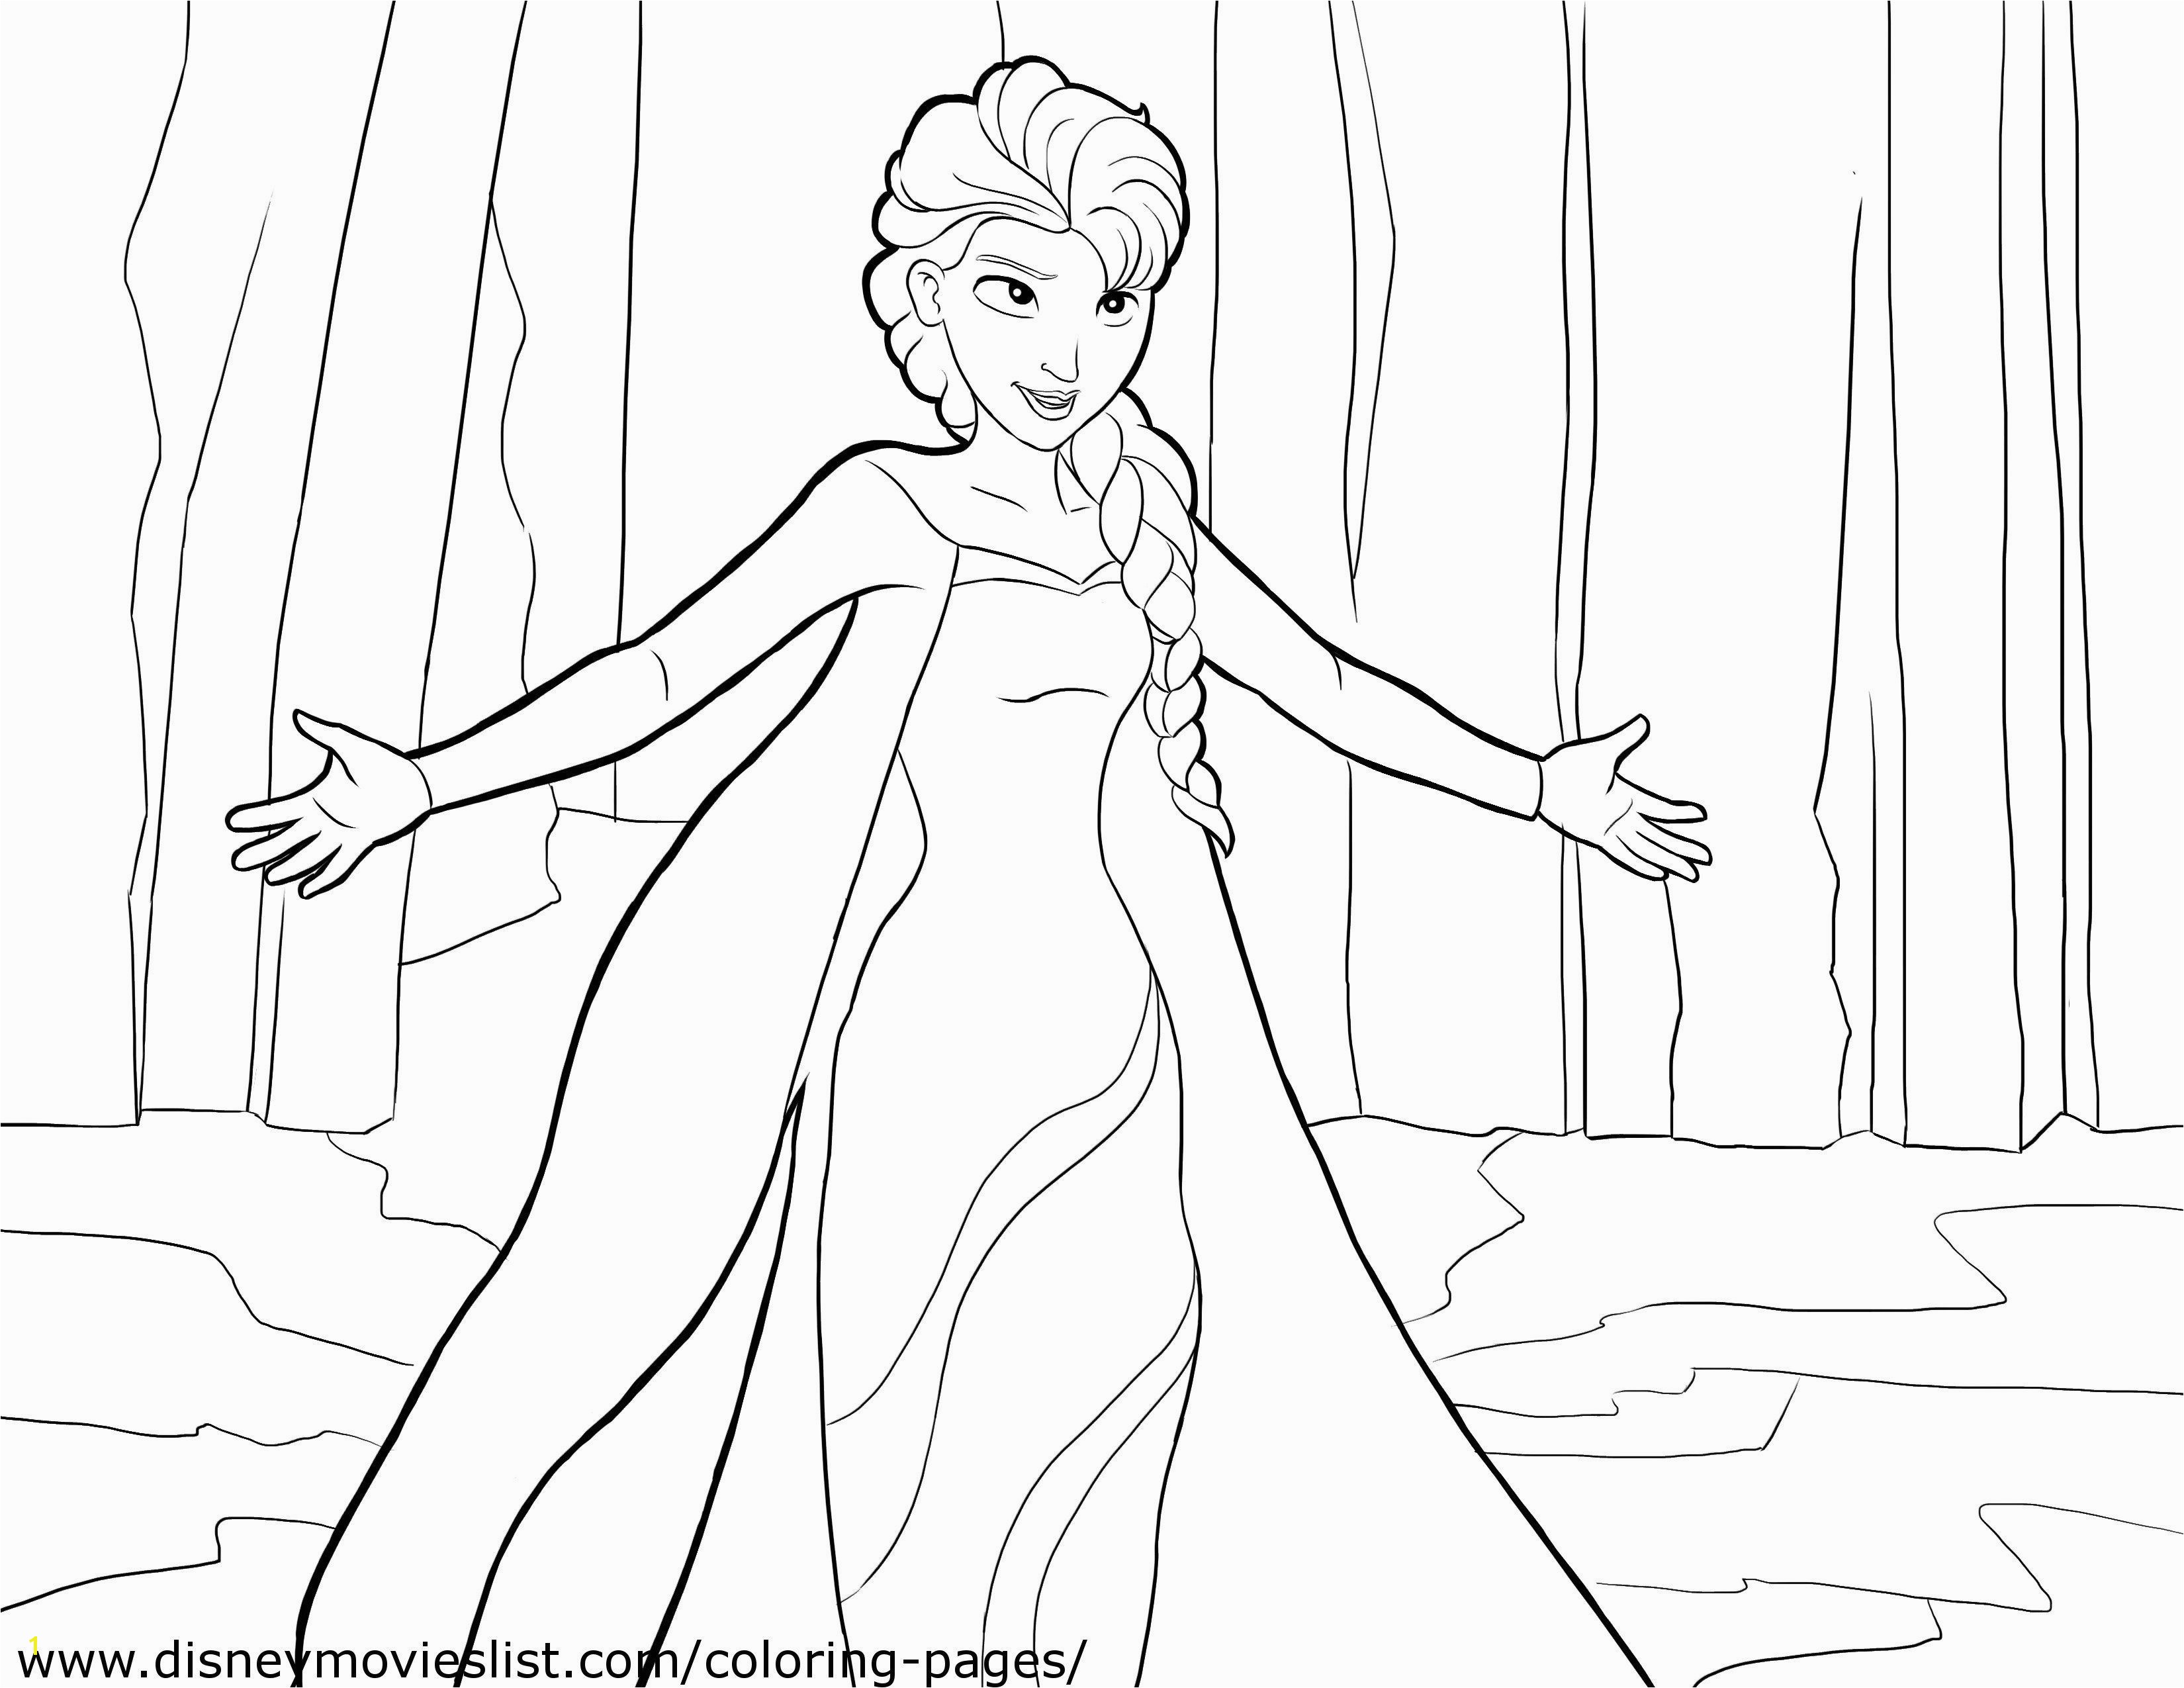 Disney S Frozen Coloring Pages Free Printable Color Beauteous Els on Free Frozen Printable Coloring Pages